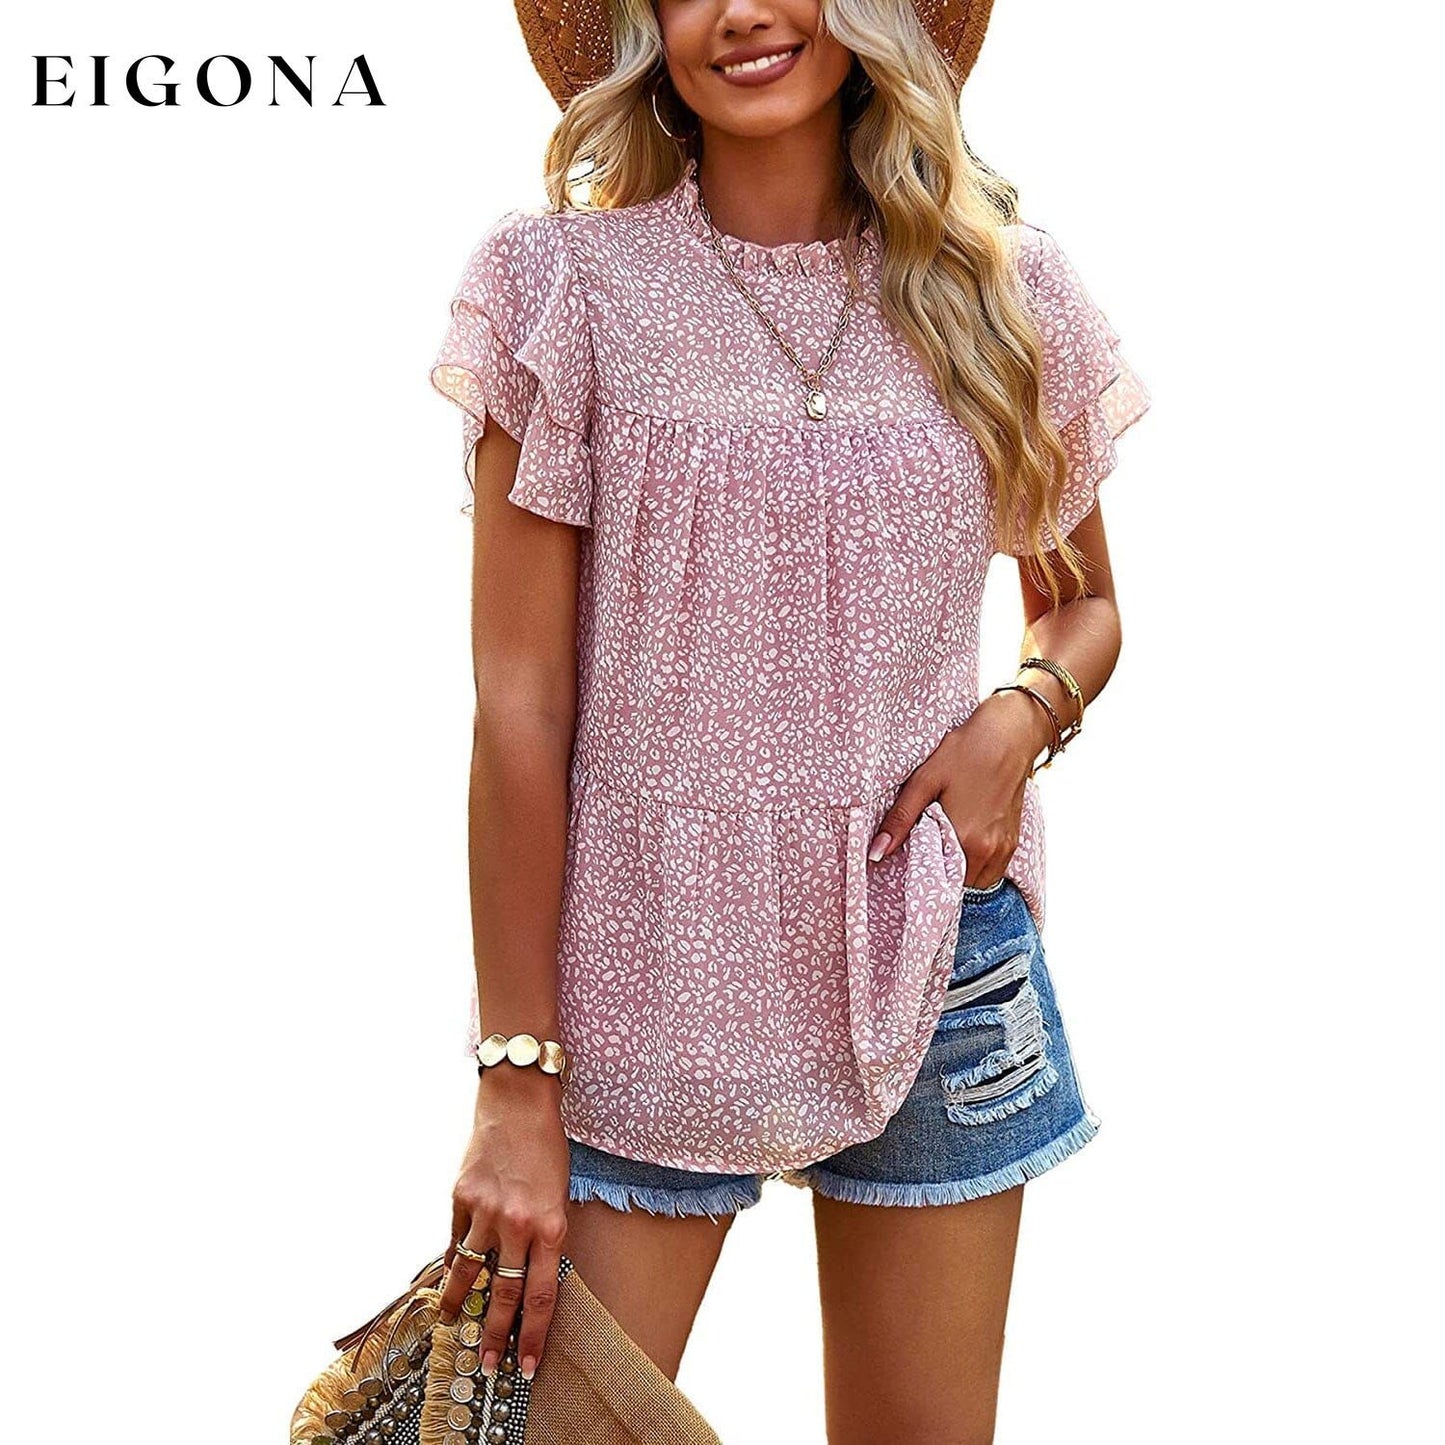 Women's Casual Summer Tops Ruffle Short Sleeve Mock Neck Fashion Floral Chiffon Blouse Shirts Pink __stock:200 clothes refund_fee:1200 tops